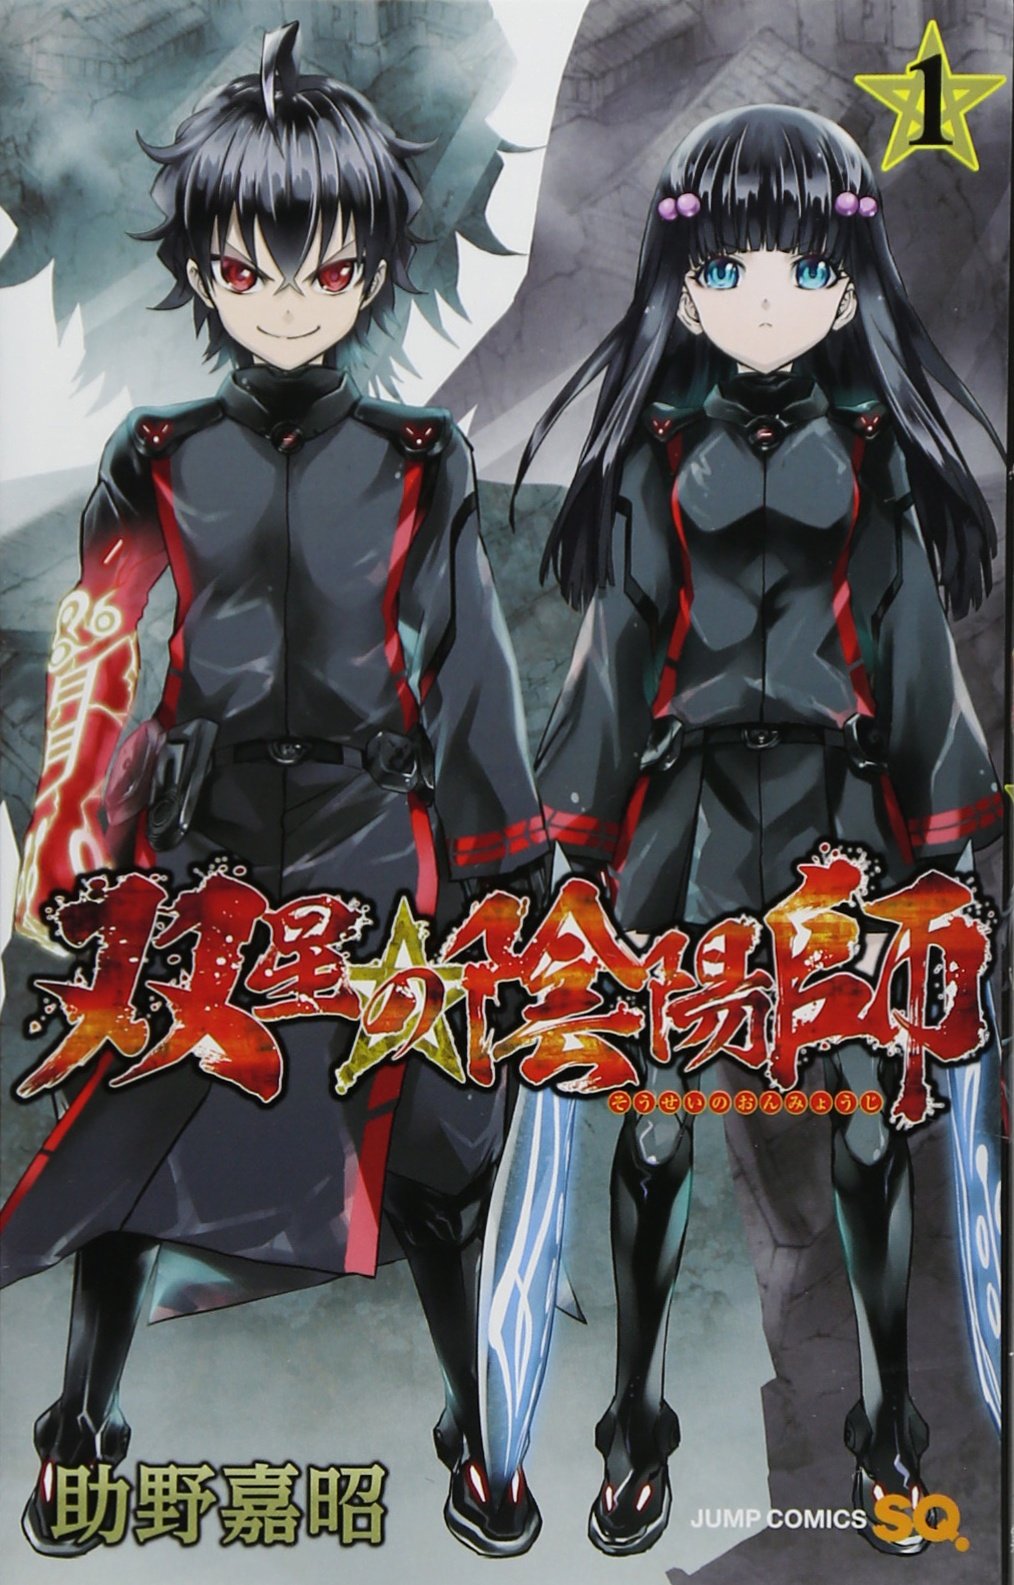 Animation 動画) Twin Star Exorcists